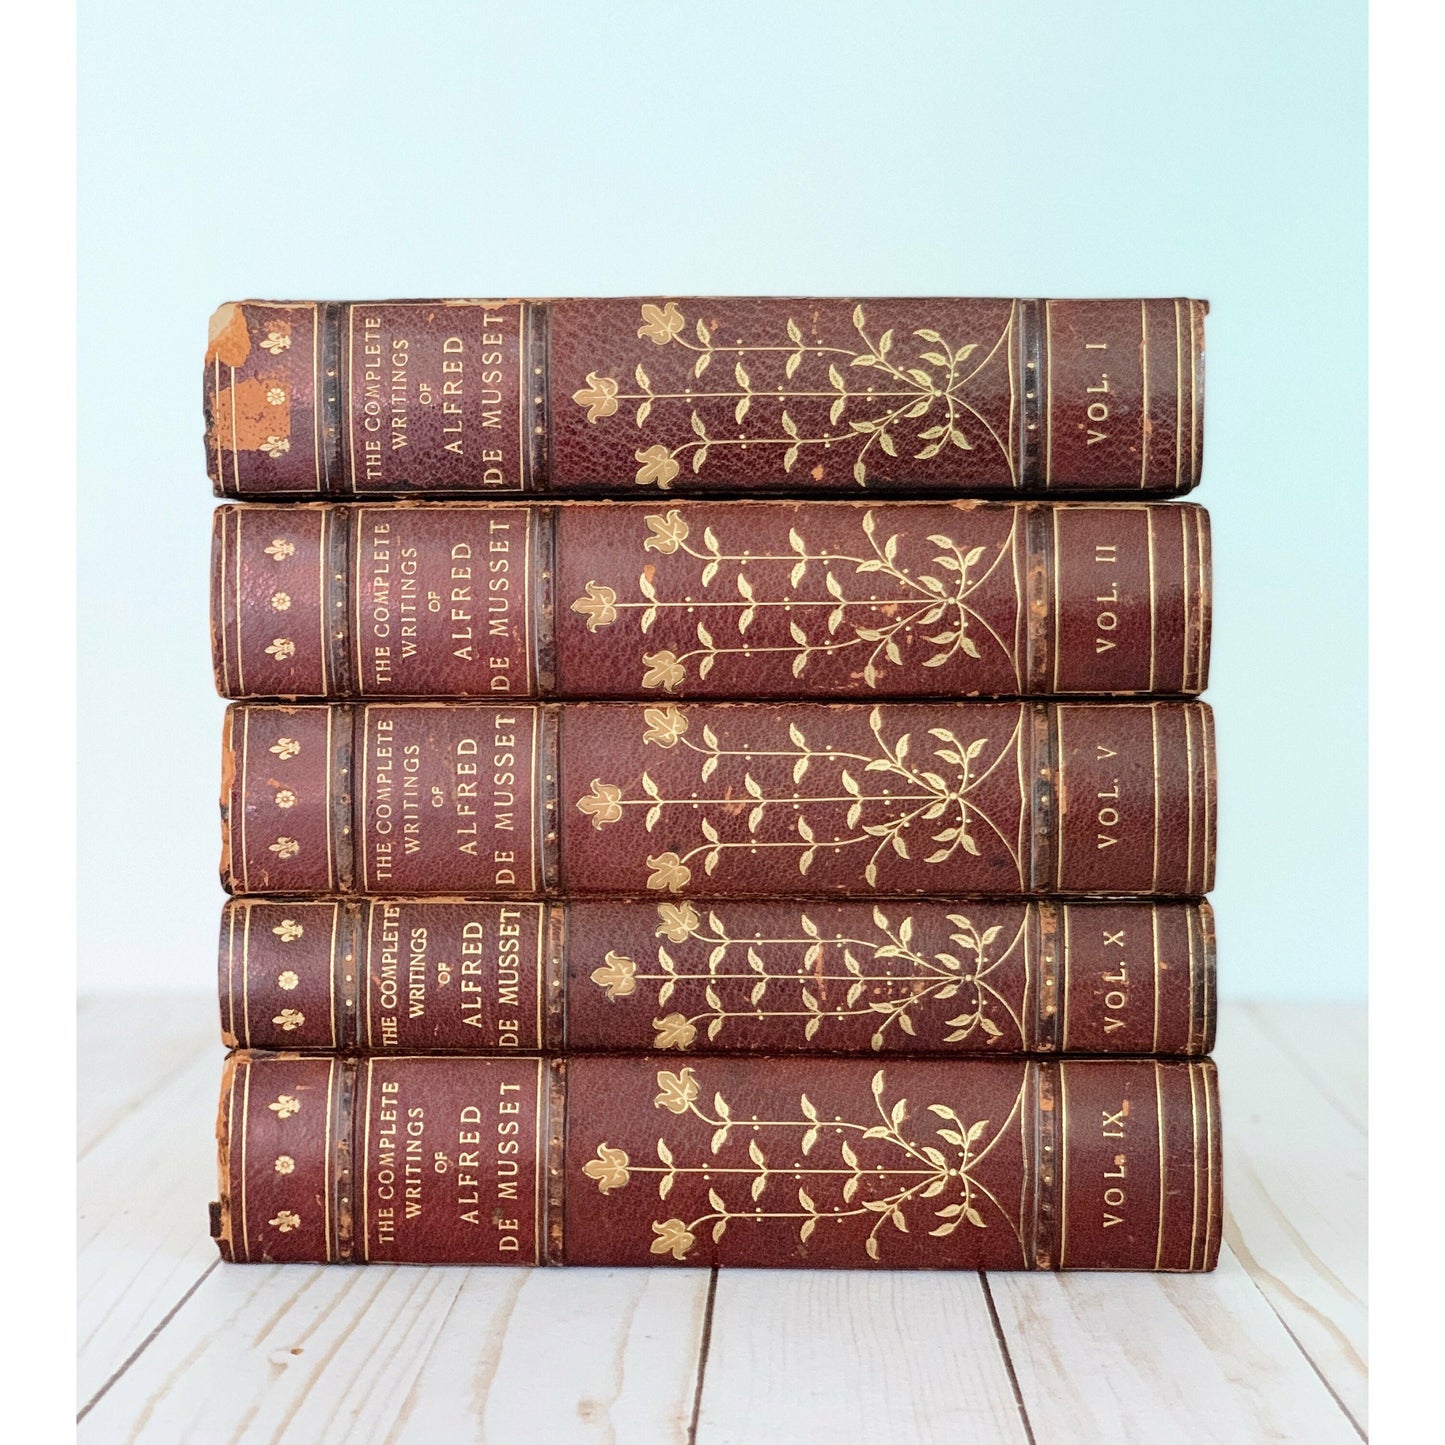 Antique Red Leather Books Alfred De Musset Book Set, Old Books for Bookshelf Decor 1905